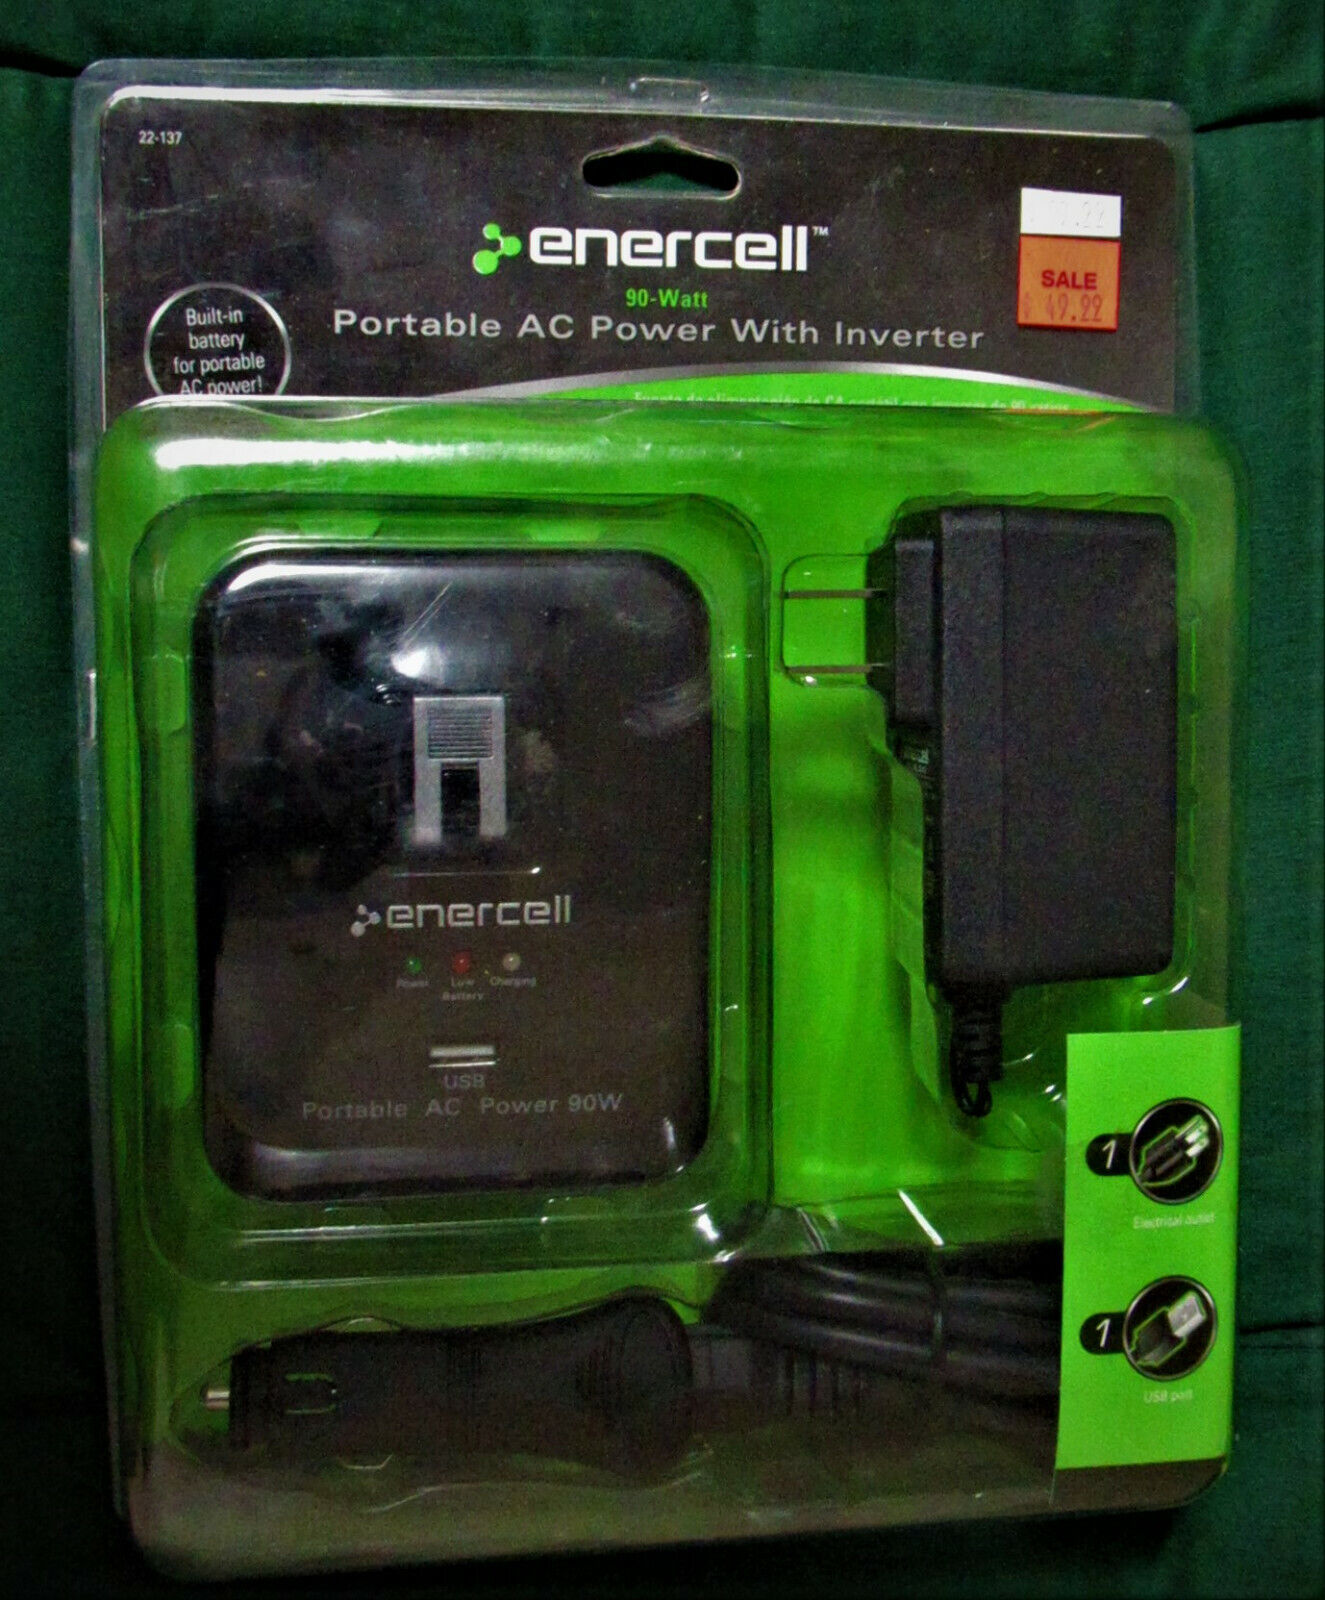 Enercell 90-WATT Portable AC Power With Inverter 22-137